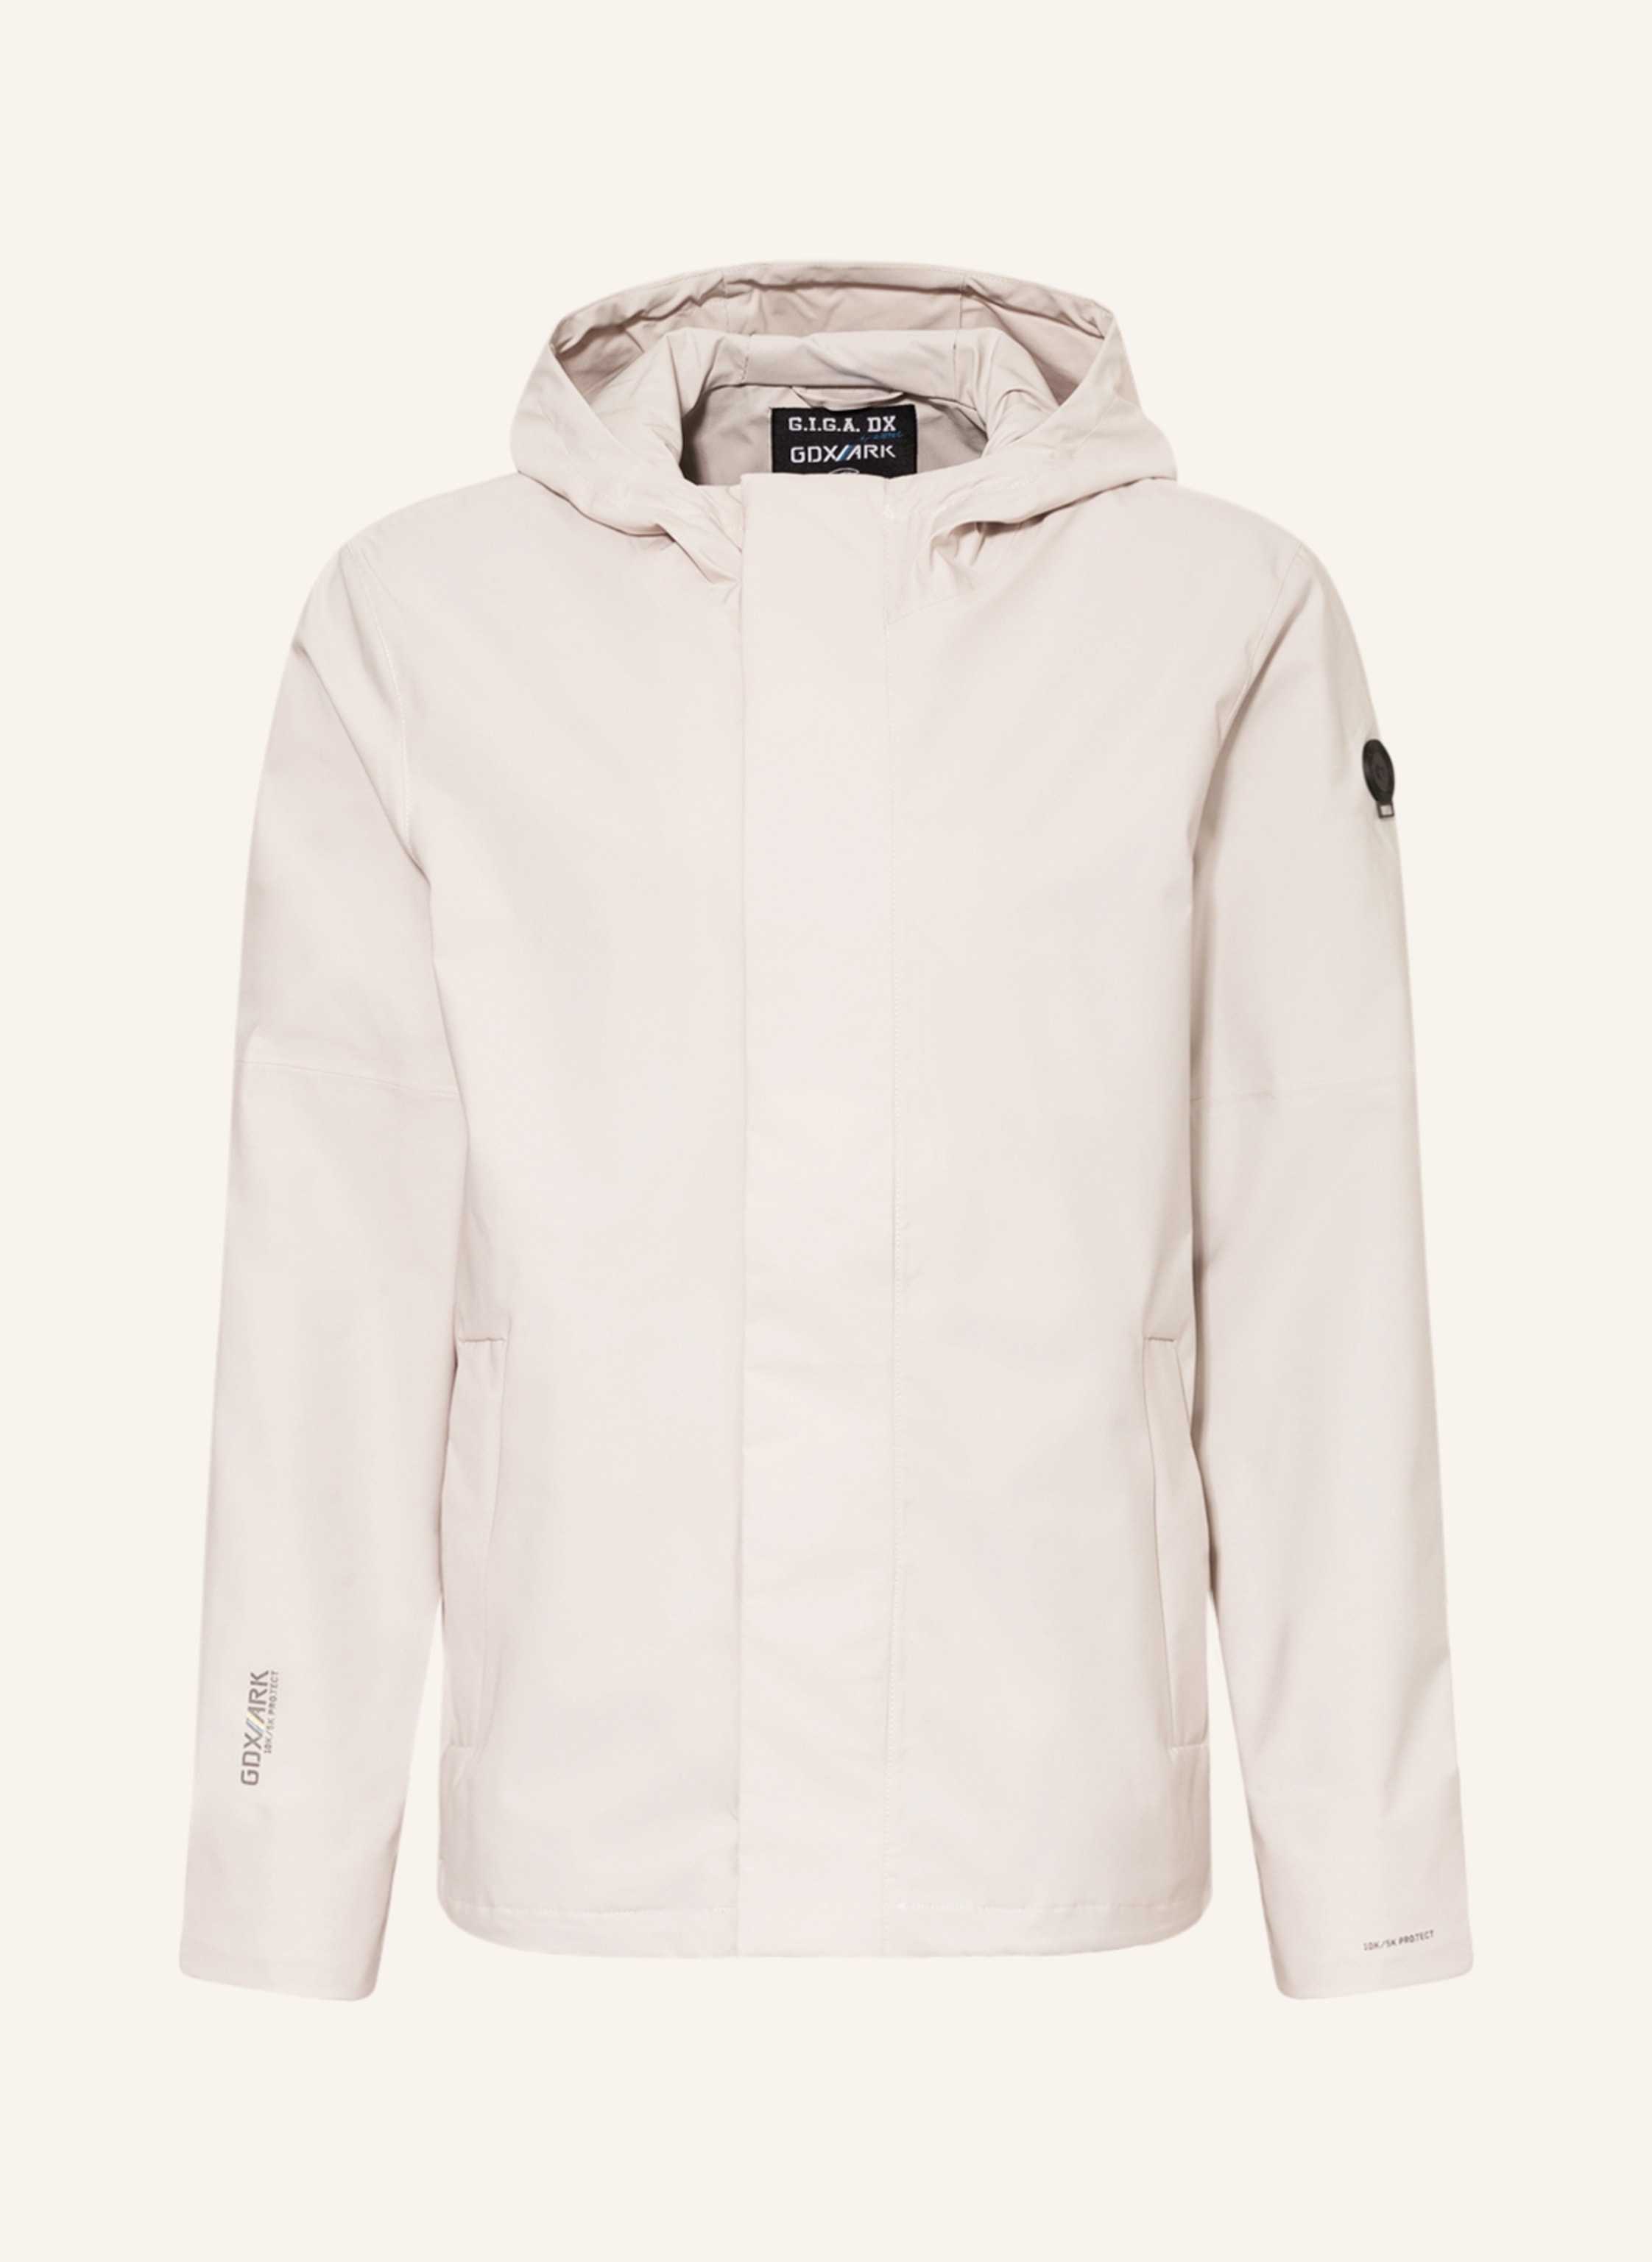 G.I.G.A. DX by killtec Outdoor jacket GS in cream 147